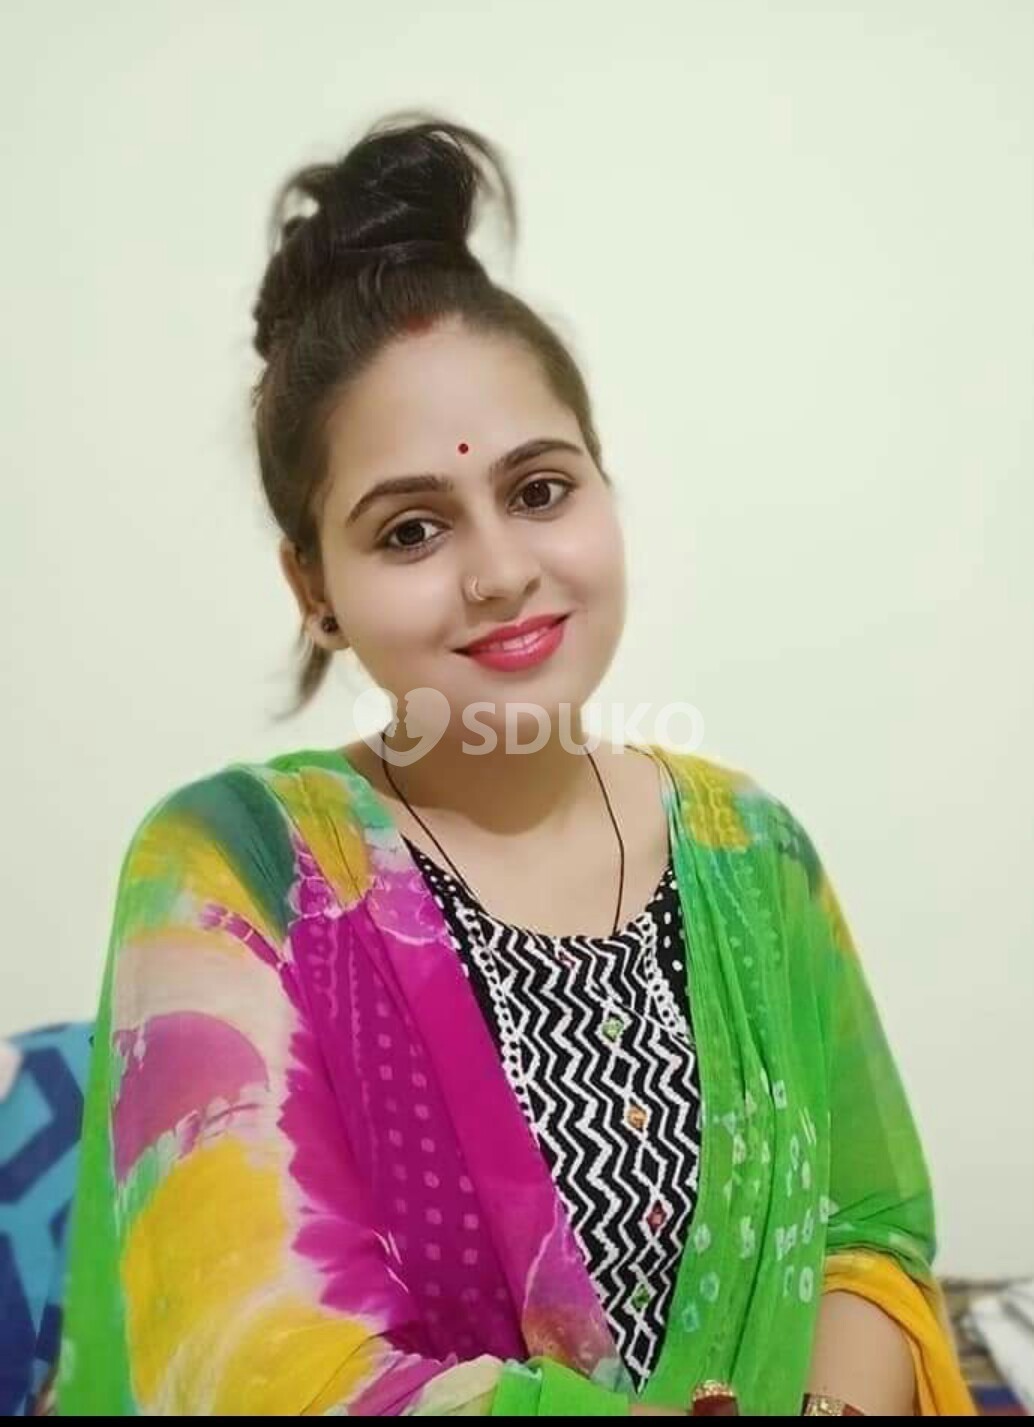 Hello Guys I am Nandini Bangalore low cost unlimited hard sex call girls service available